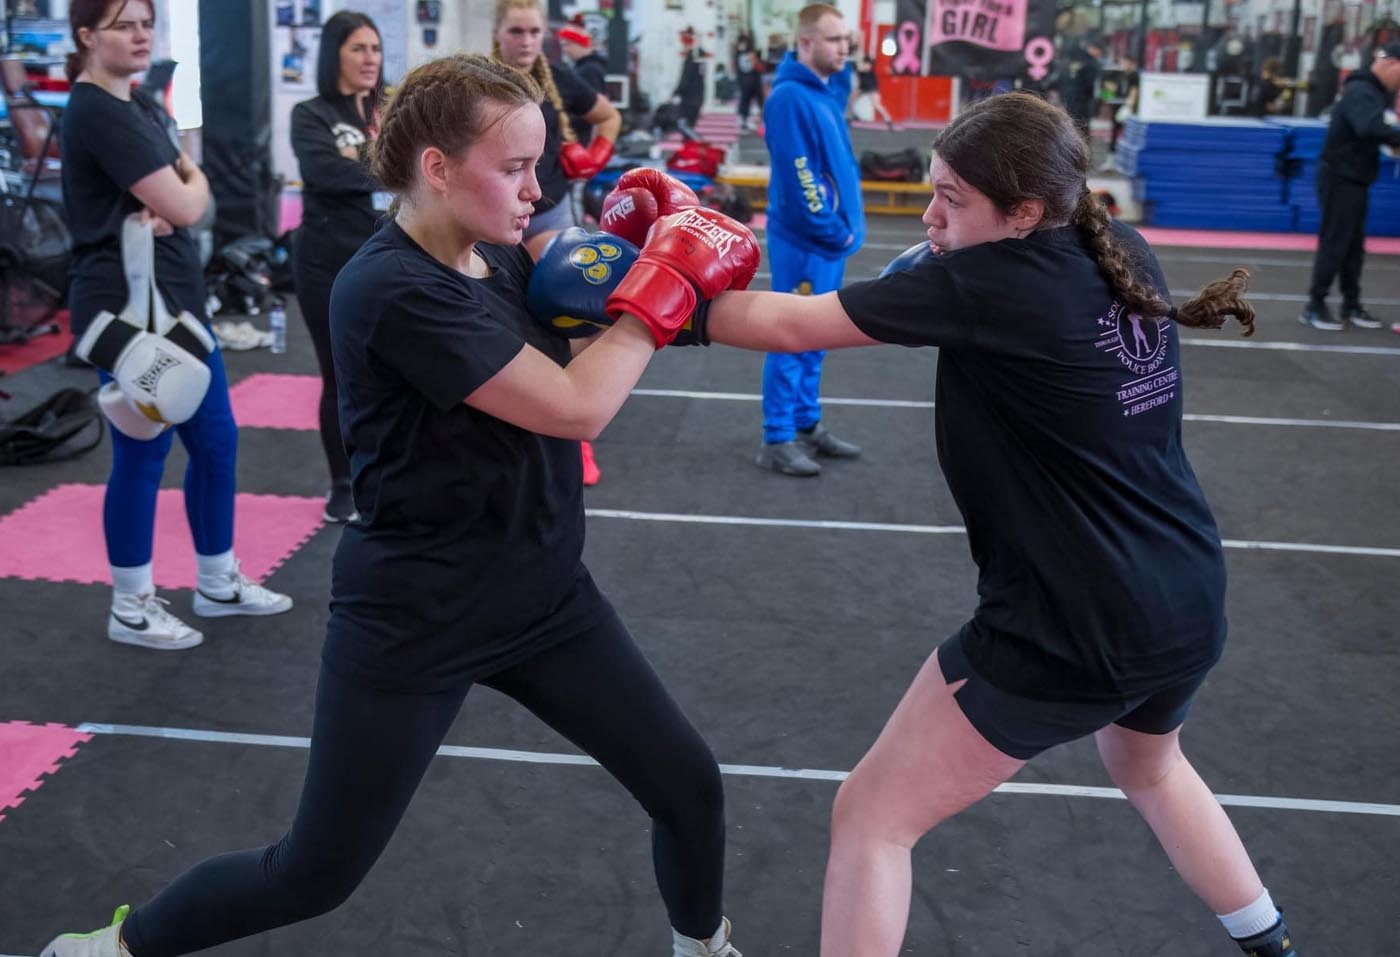 FLAG (Fight Like A Girl) at South Wye Police Boxing Academy